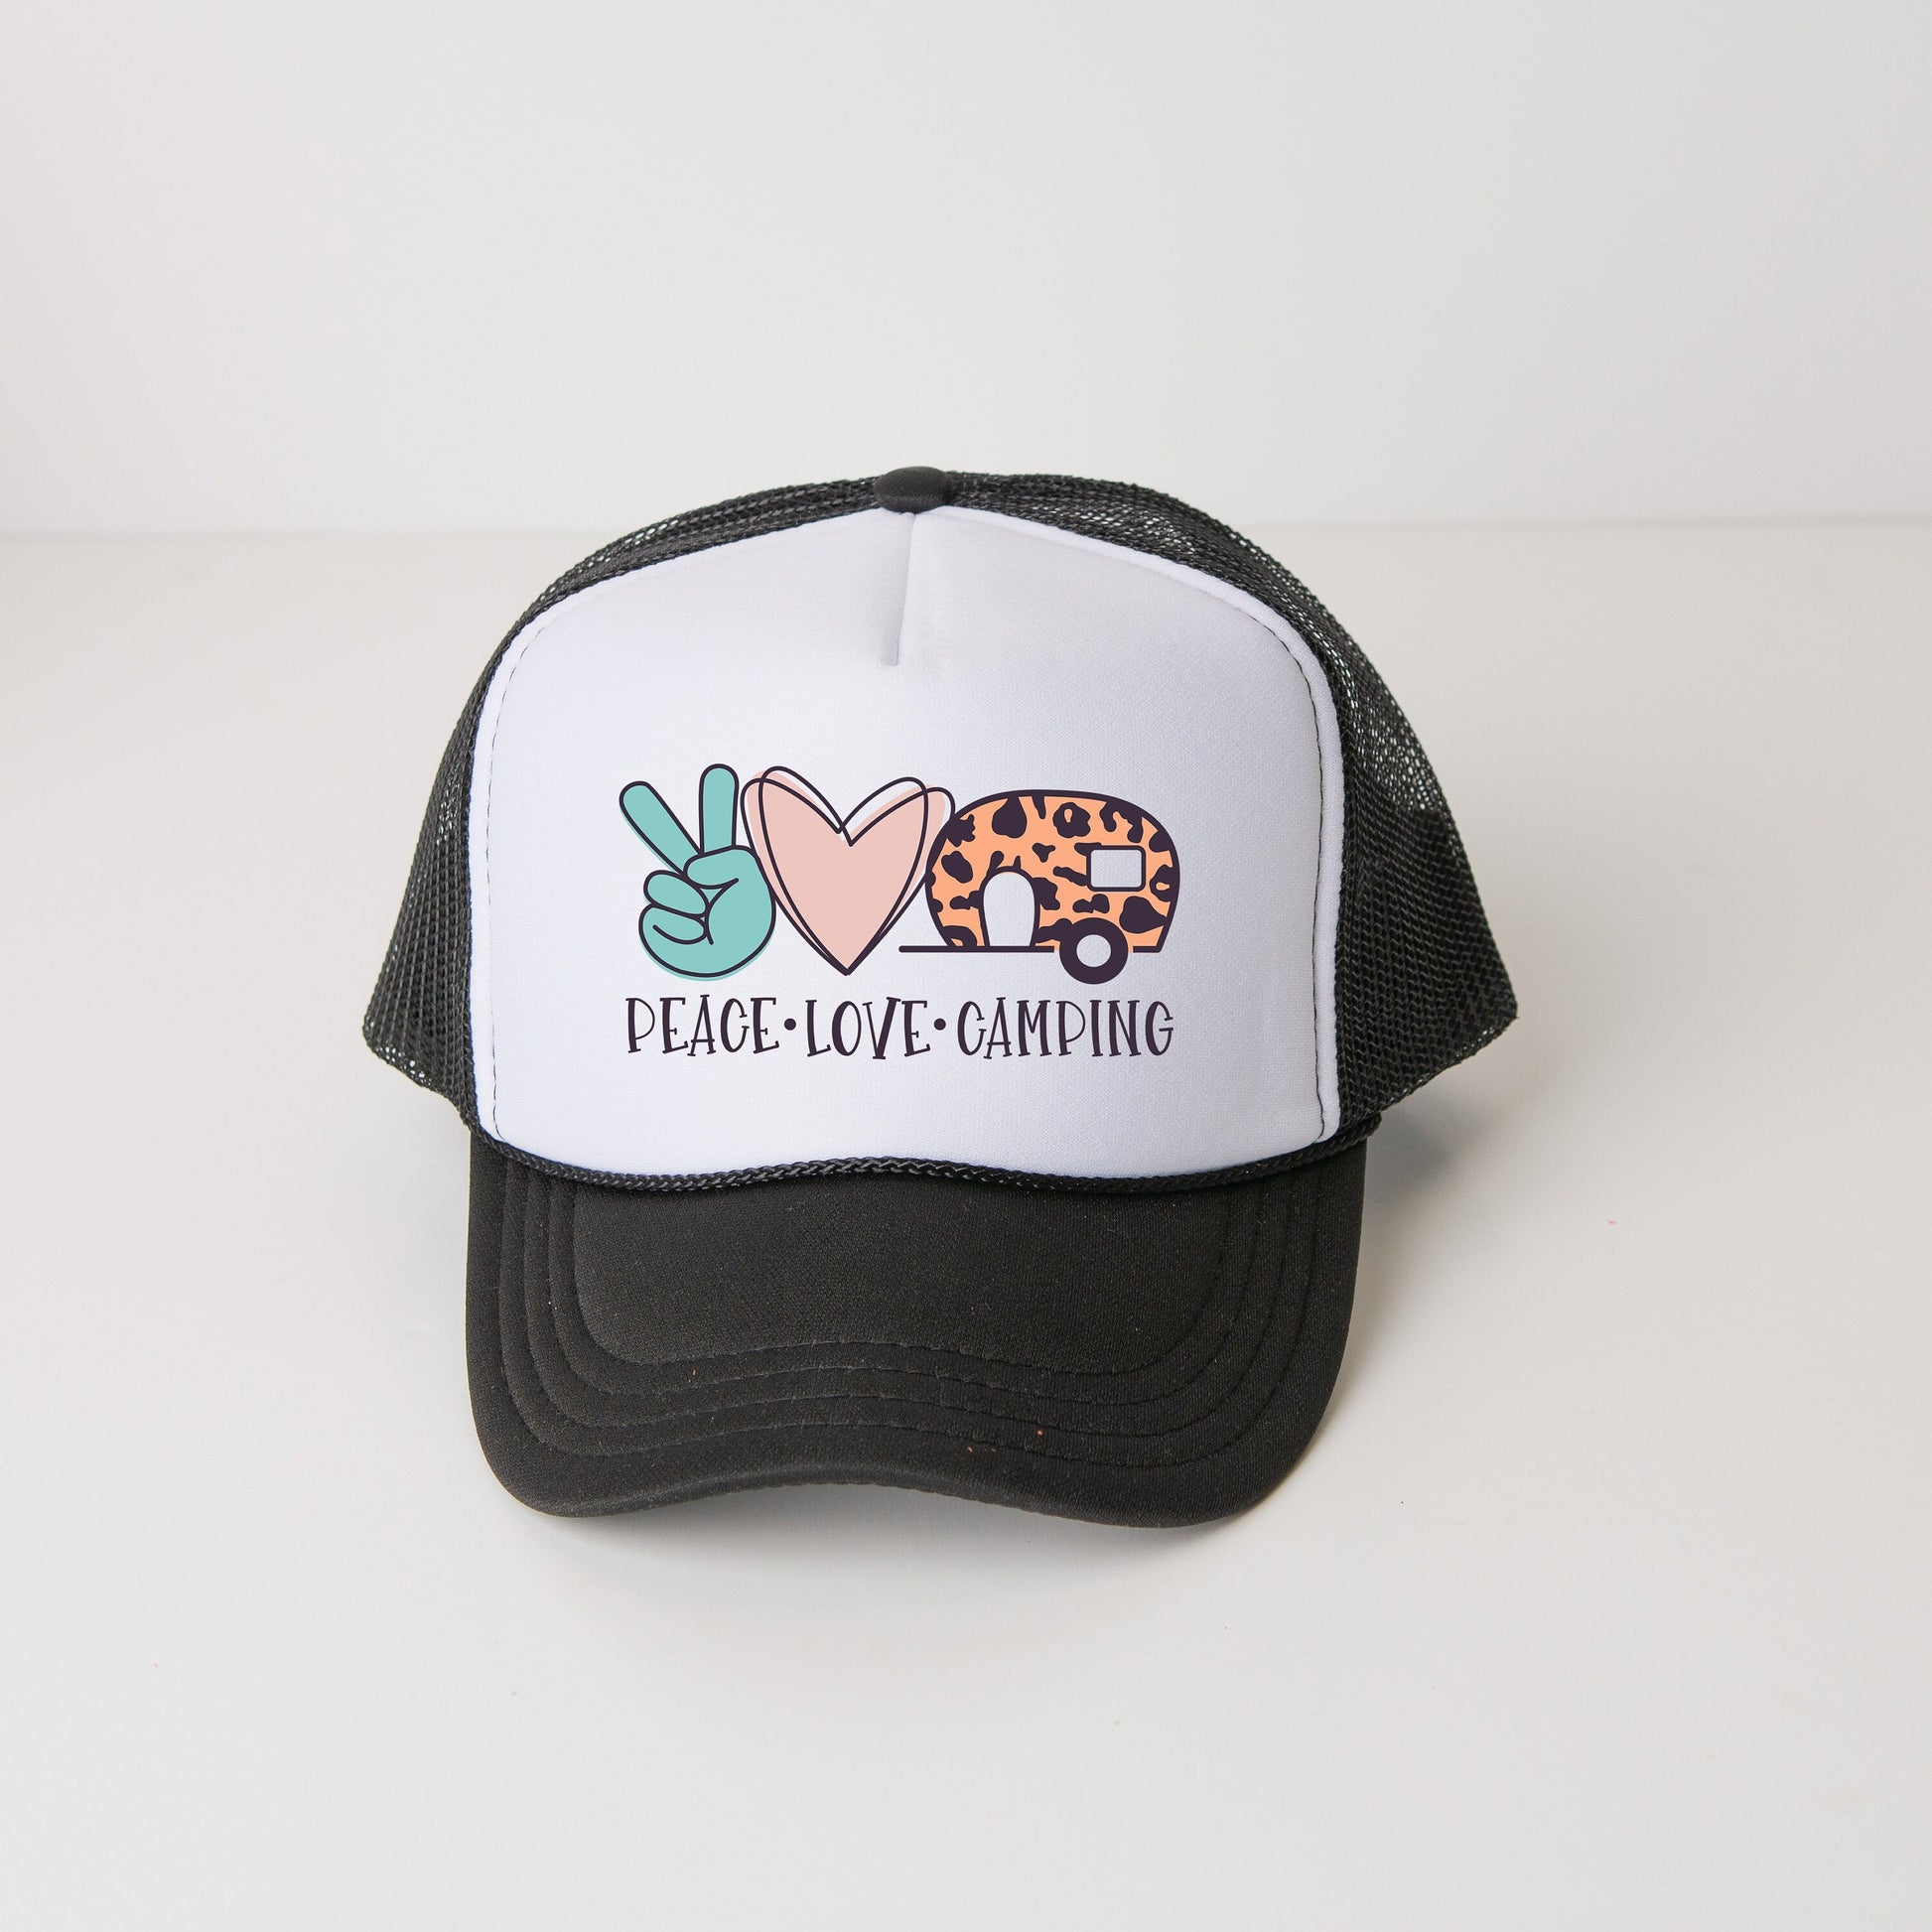 a black and white trucker hat with a peace love camping design